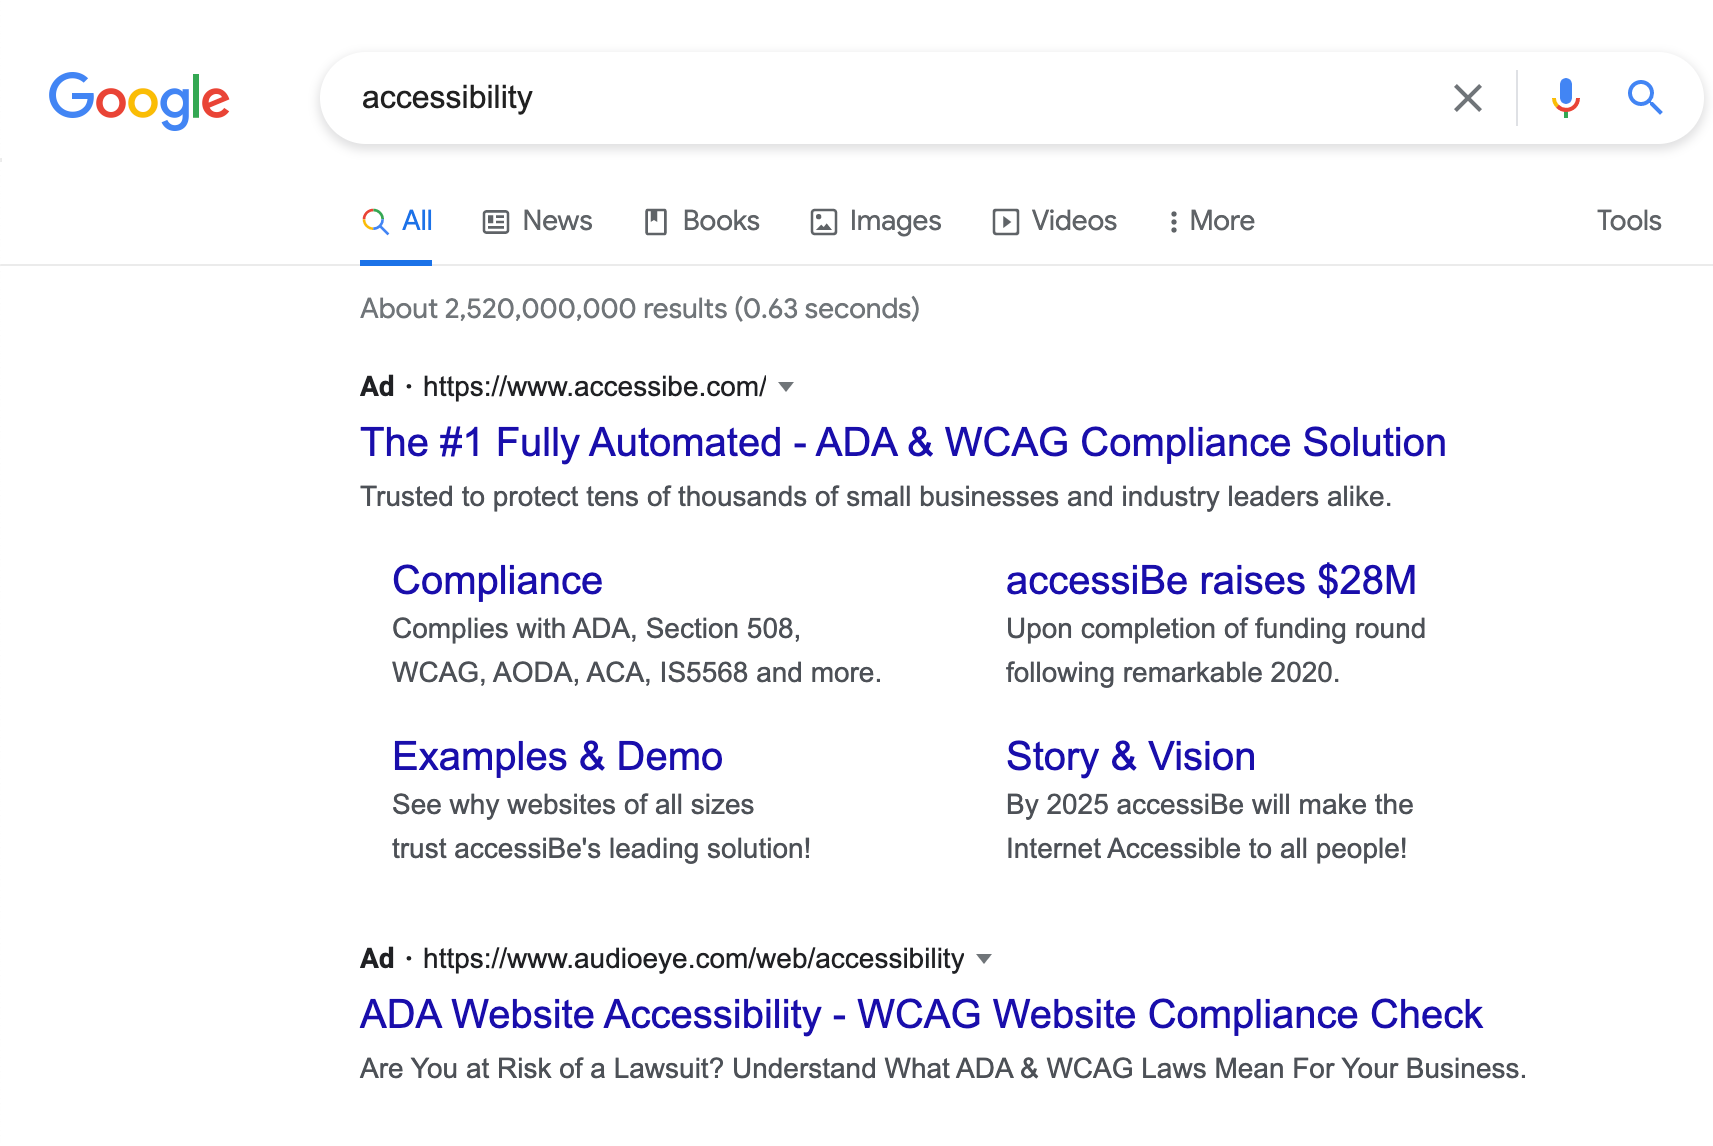 Screenshot of a Google search for “accessibility.” The top result is an ad for accessiBe, which takes up the majority of the page. Immediately below it is an ad for AudioEye.